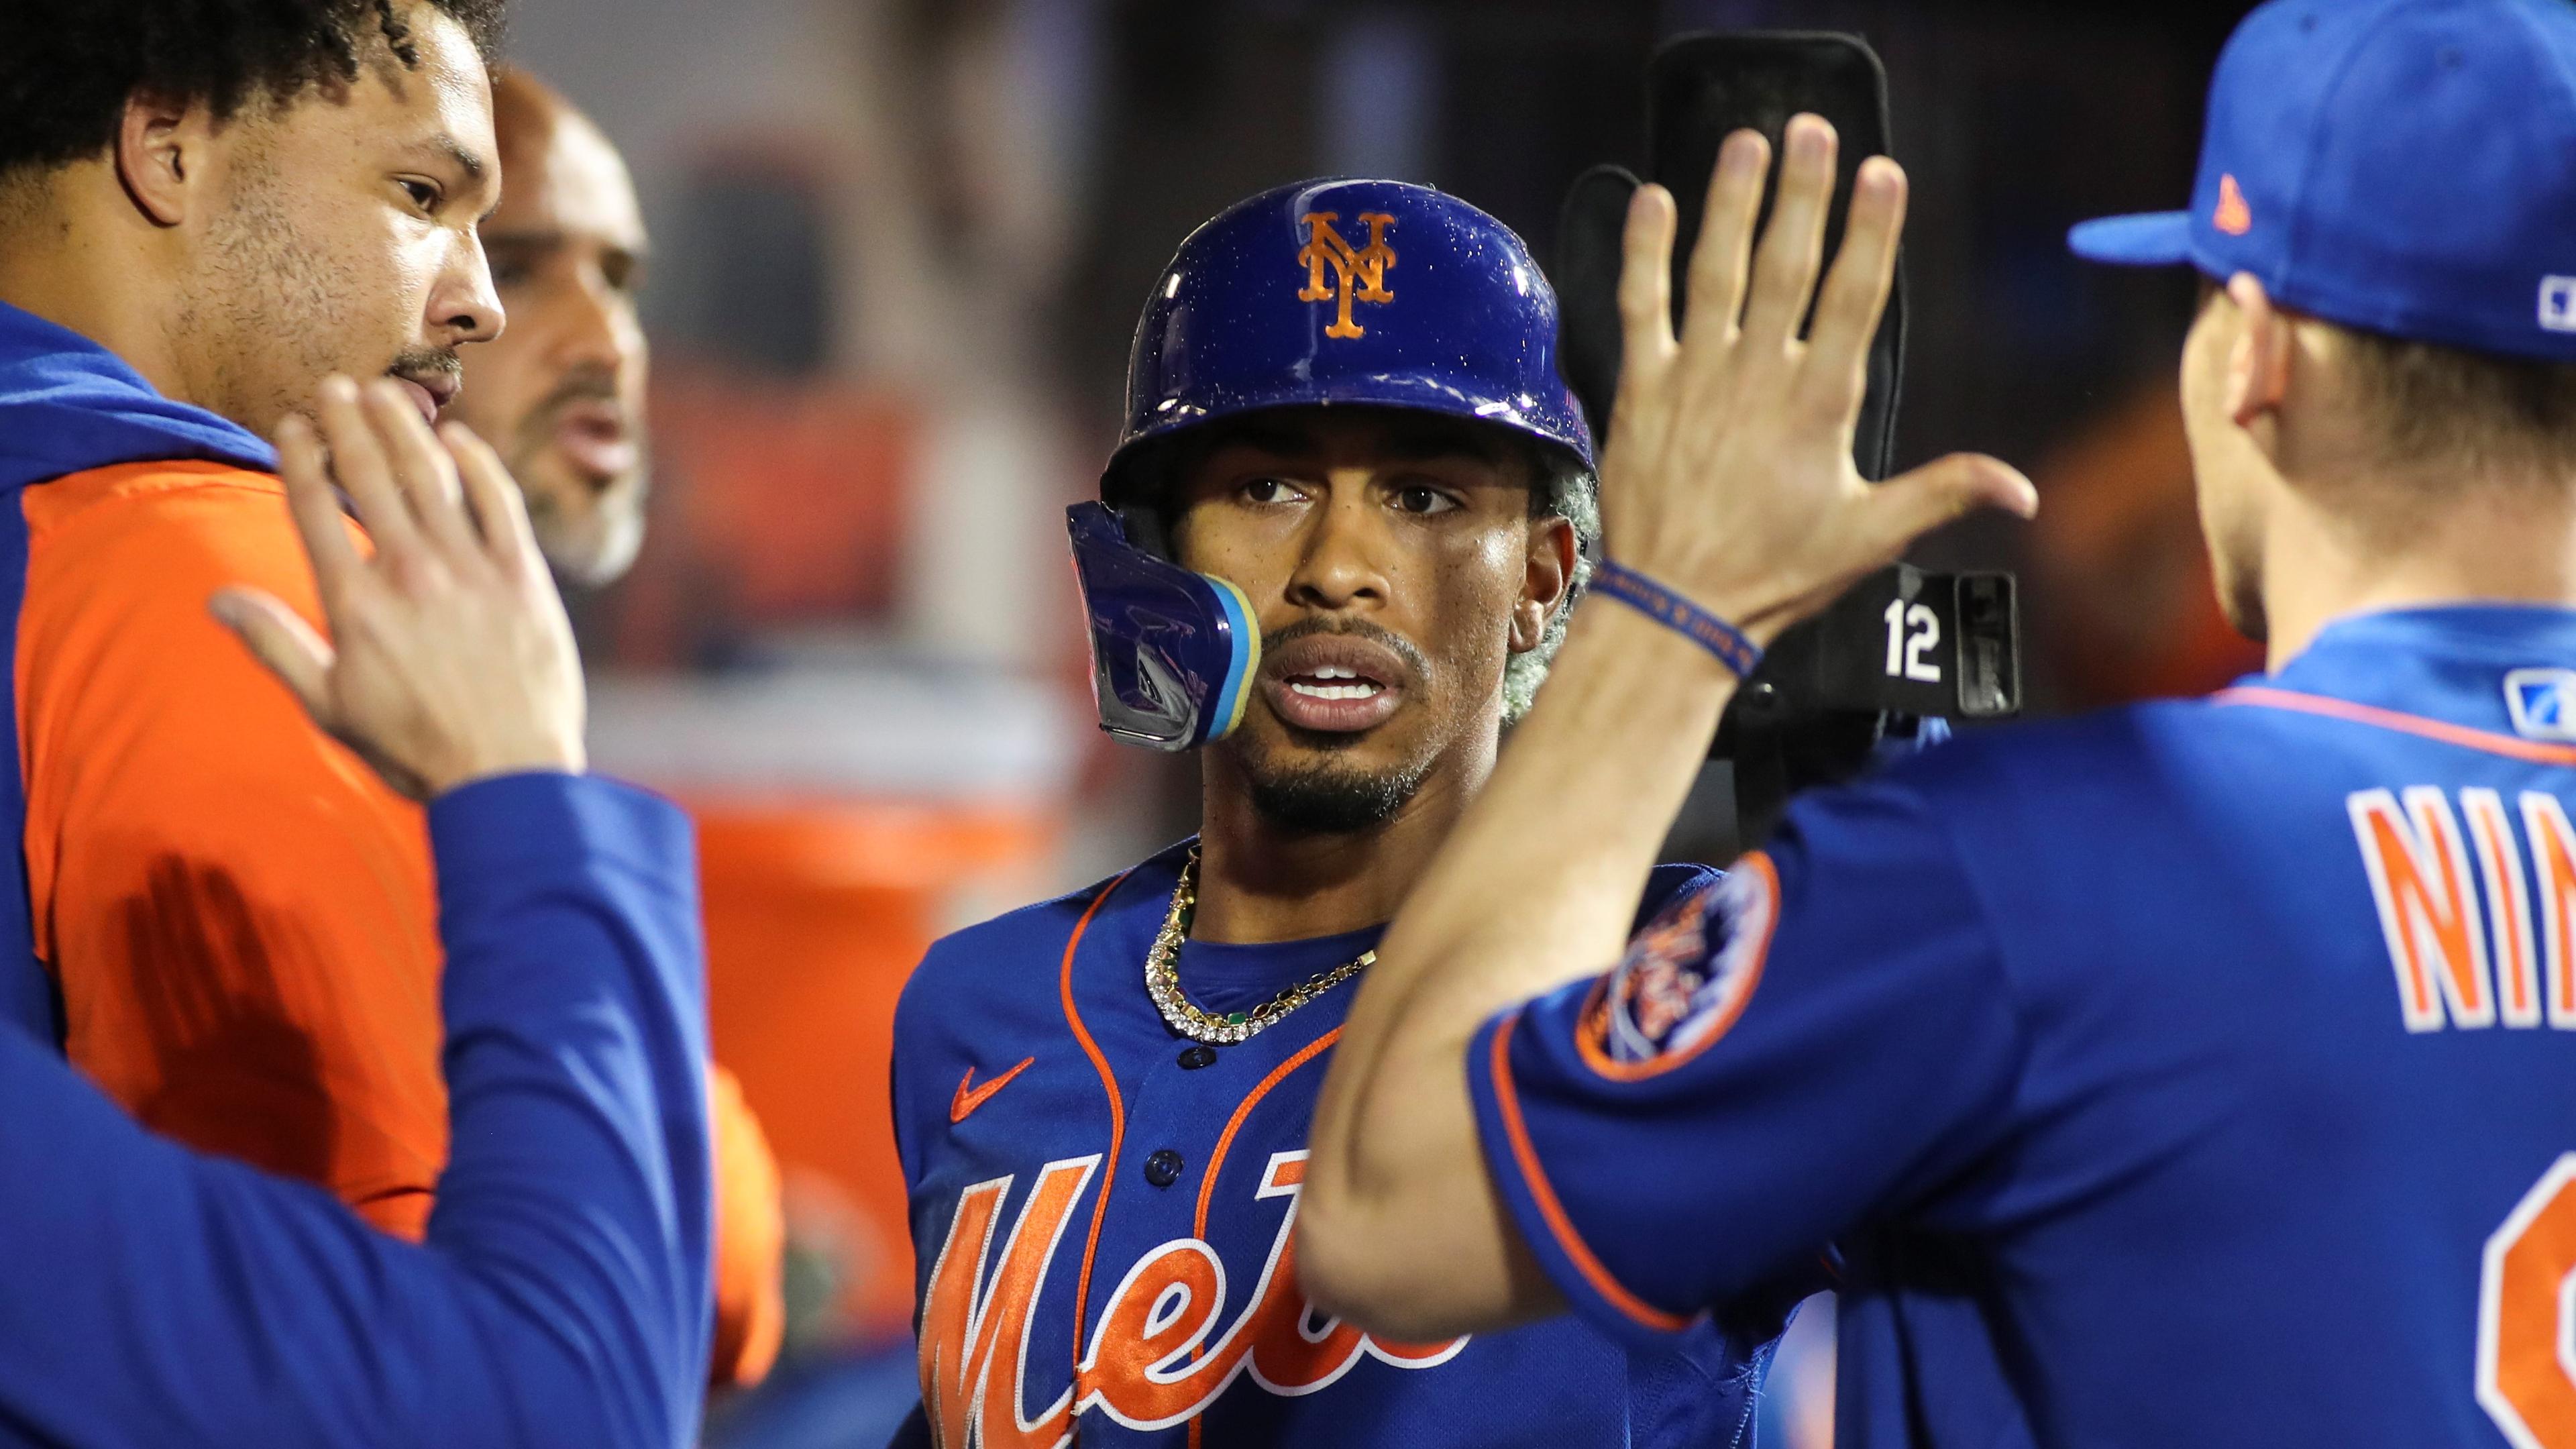 May 28, 2022; New York City, New York, USA; New York Mets shortstop Francisco Lindor (12) is greeted in the dugout after hitting a two run triple in the fifth inning at Citi Field. Mandatory Credit: Wendell Cruz-USA TODAY Sports / Wendell Cruz-USA TODAY Sports